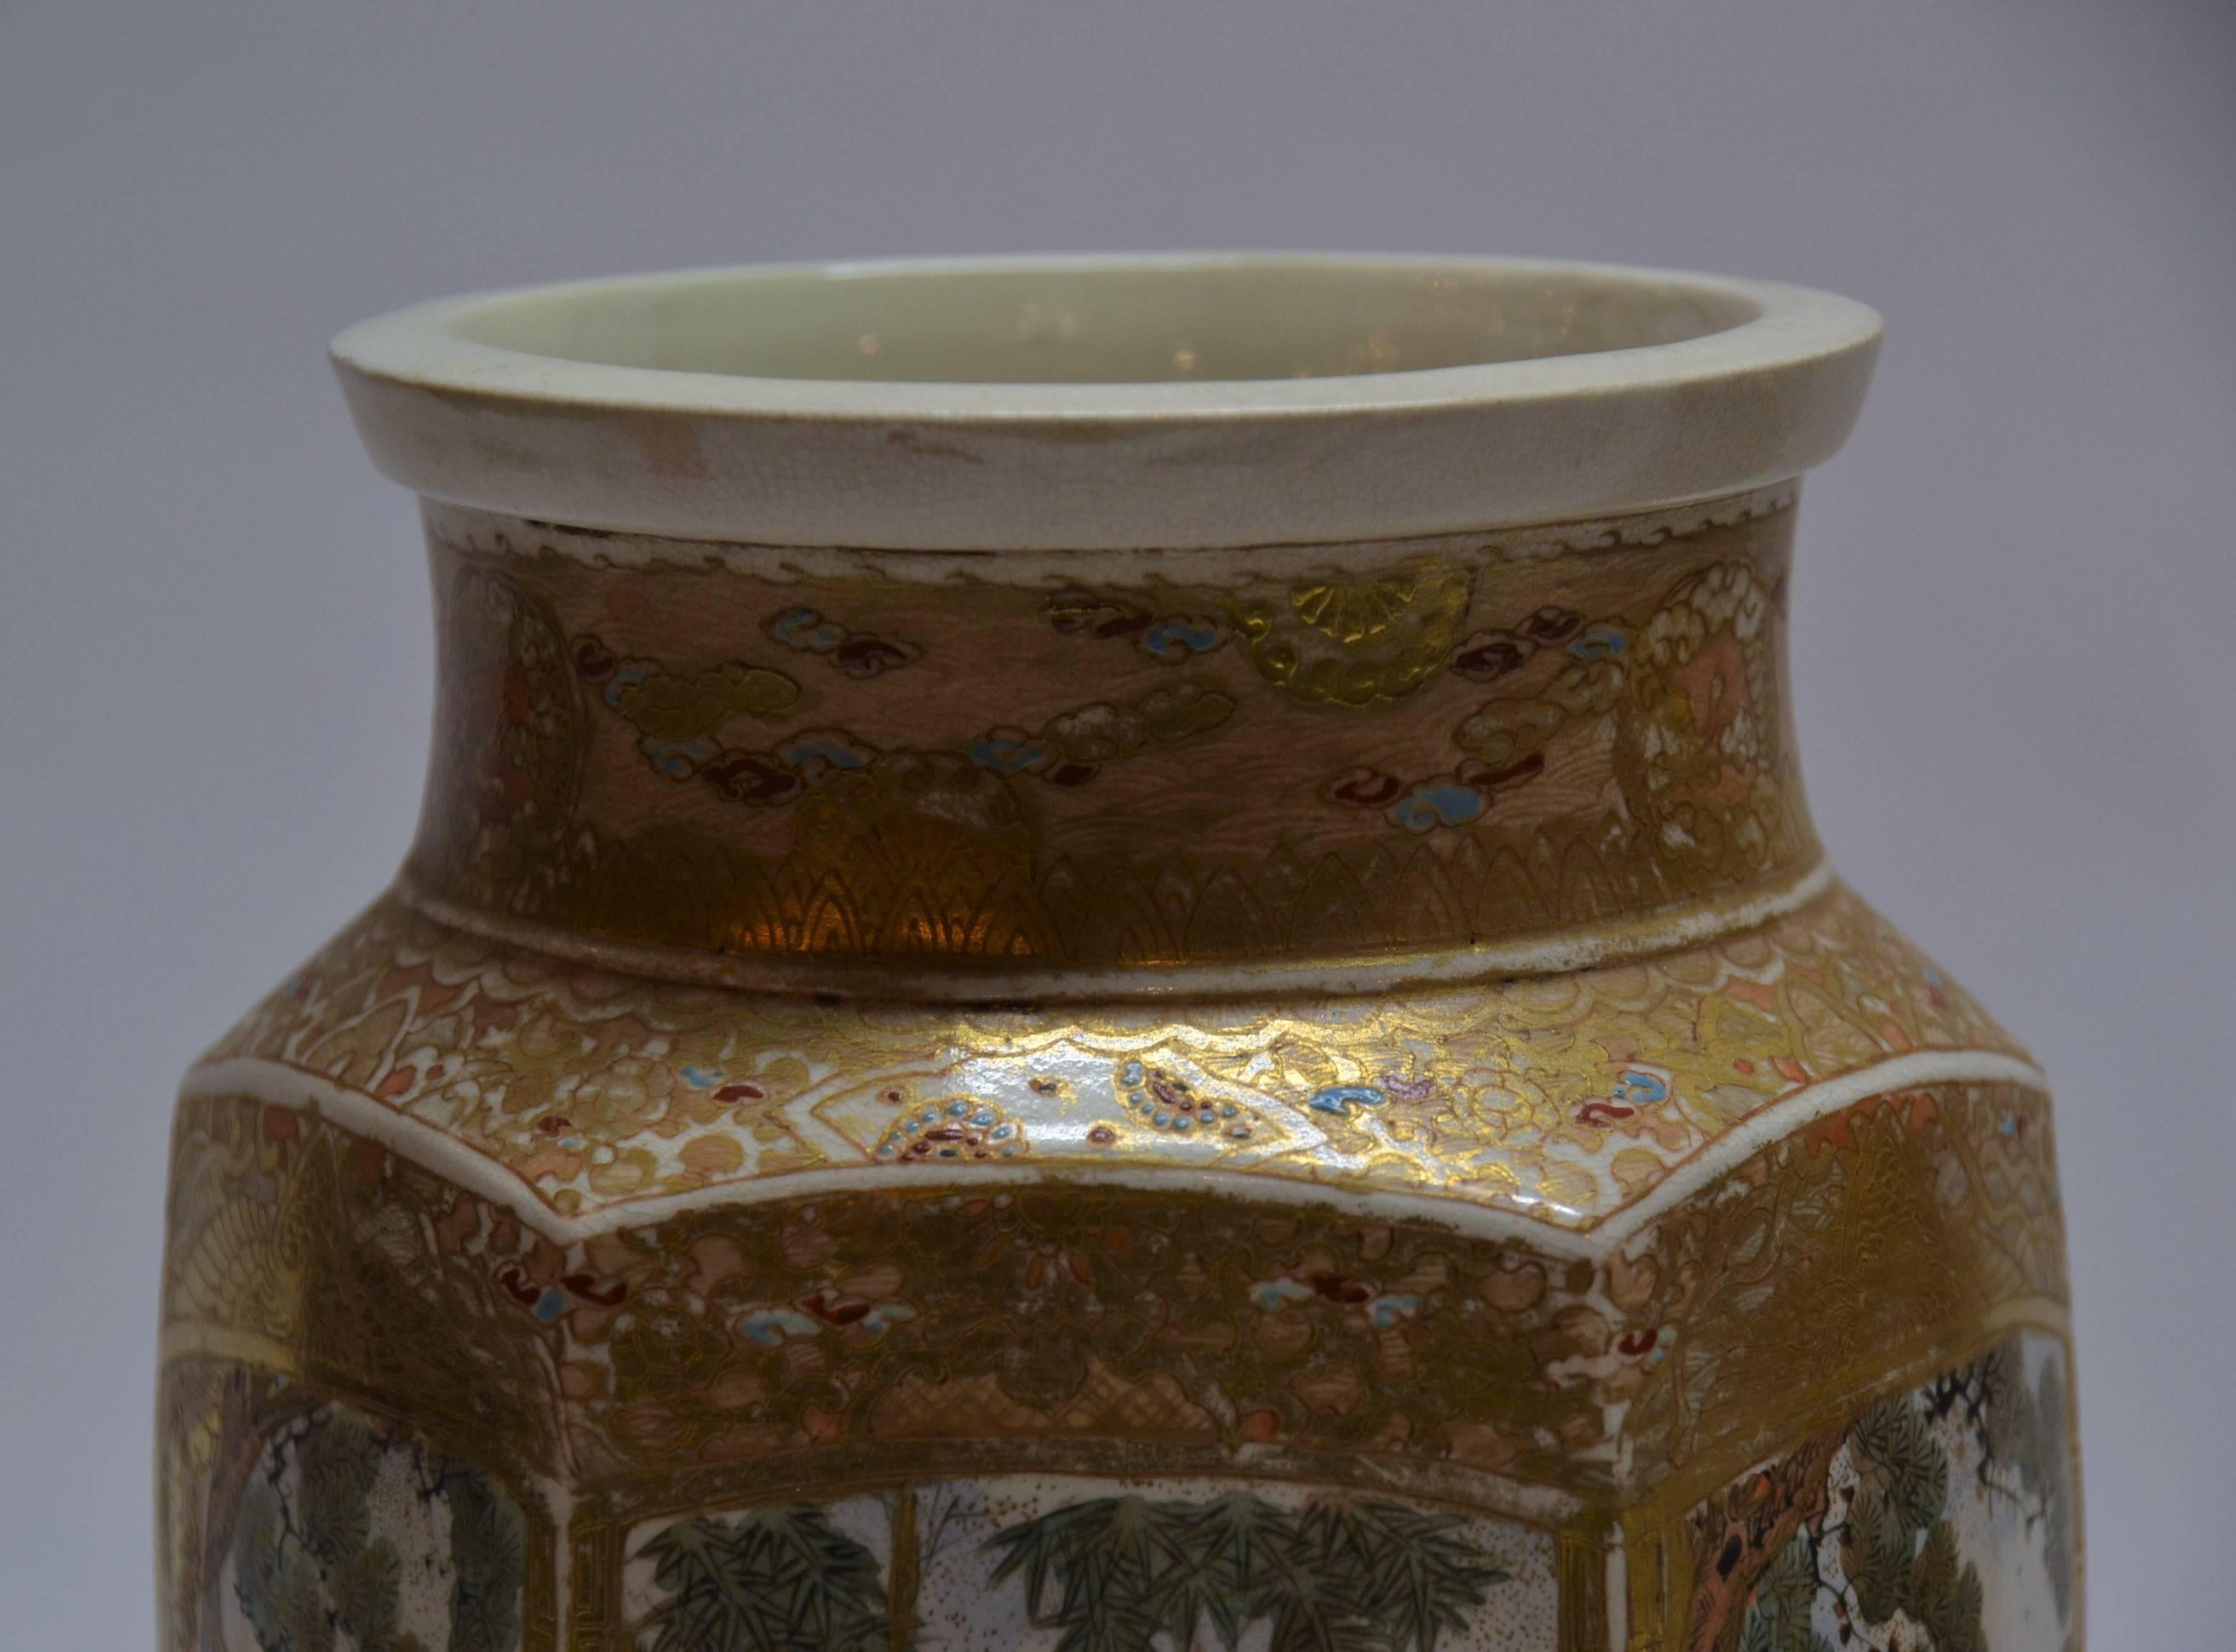 Late 19th Century Pair of Japanese Gold and Multicolored Satsuma Porcelain Vases, circa 1890